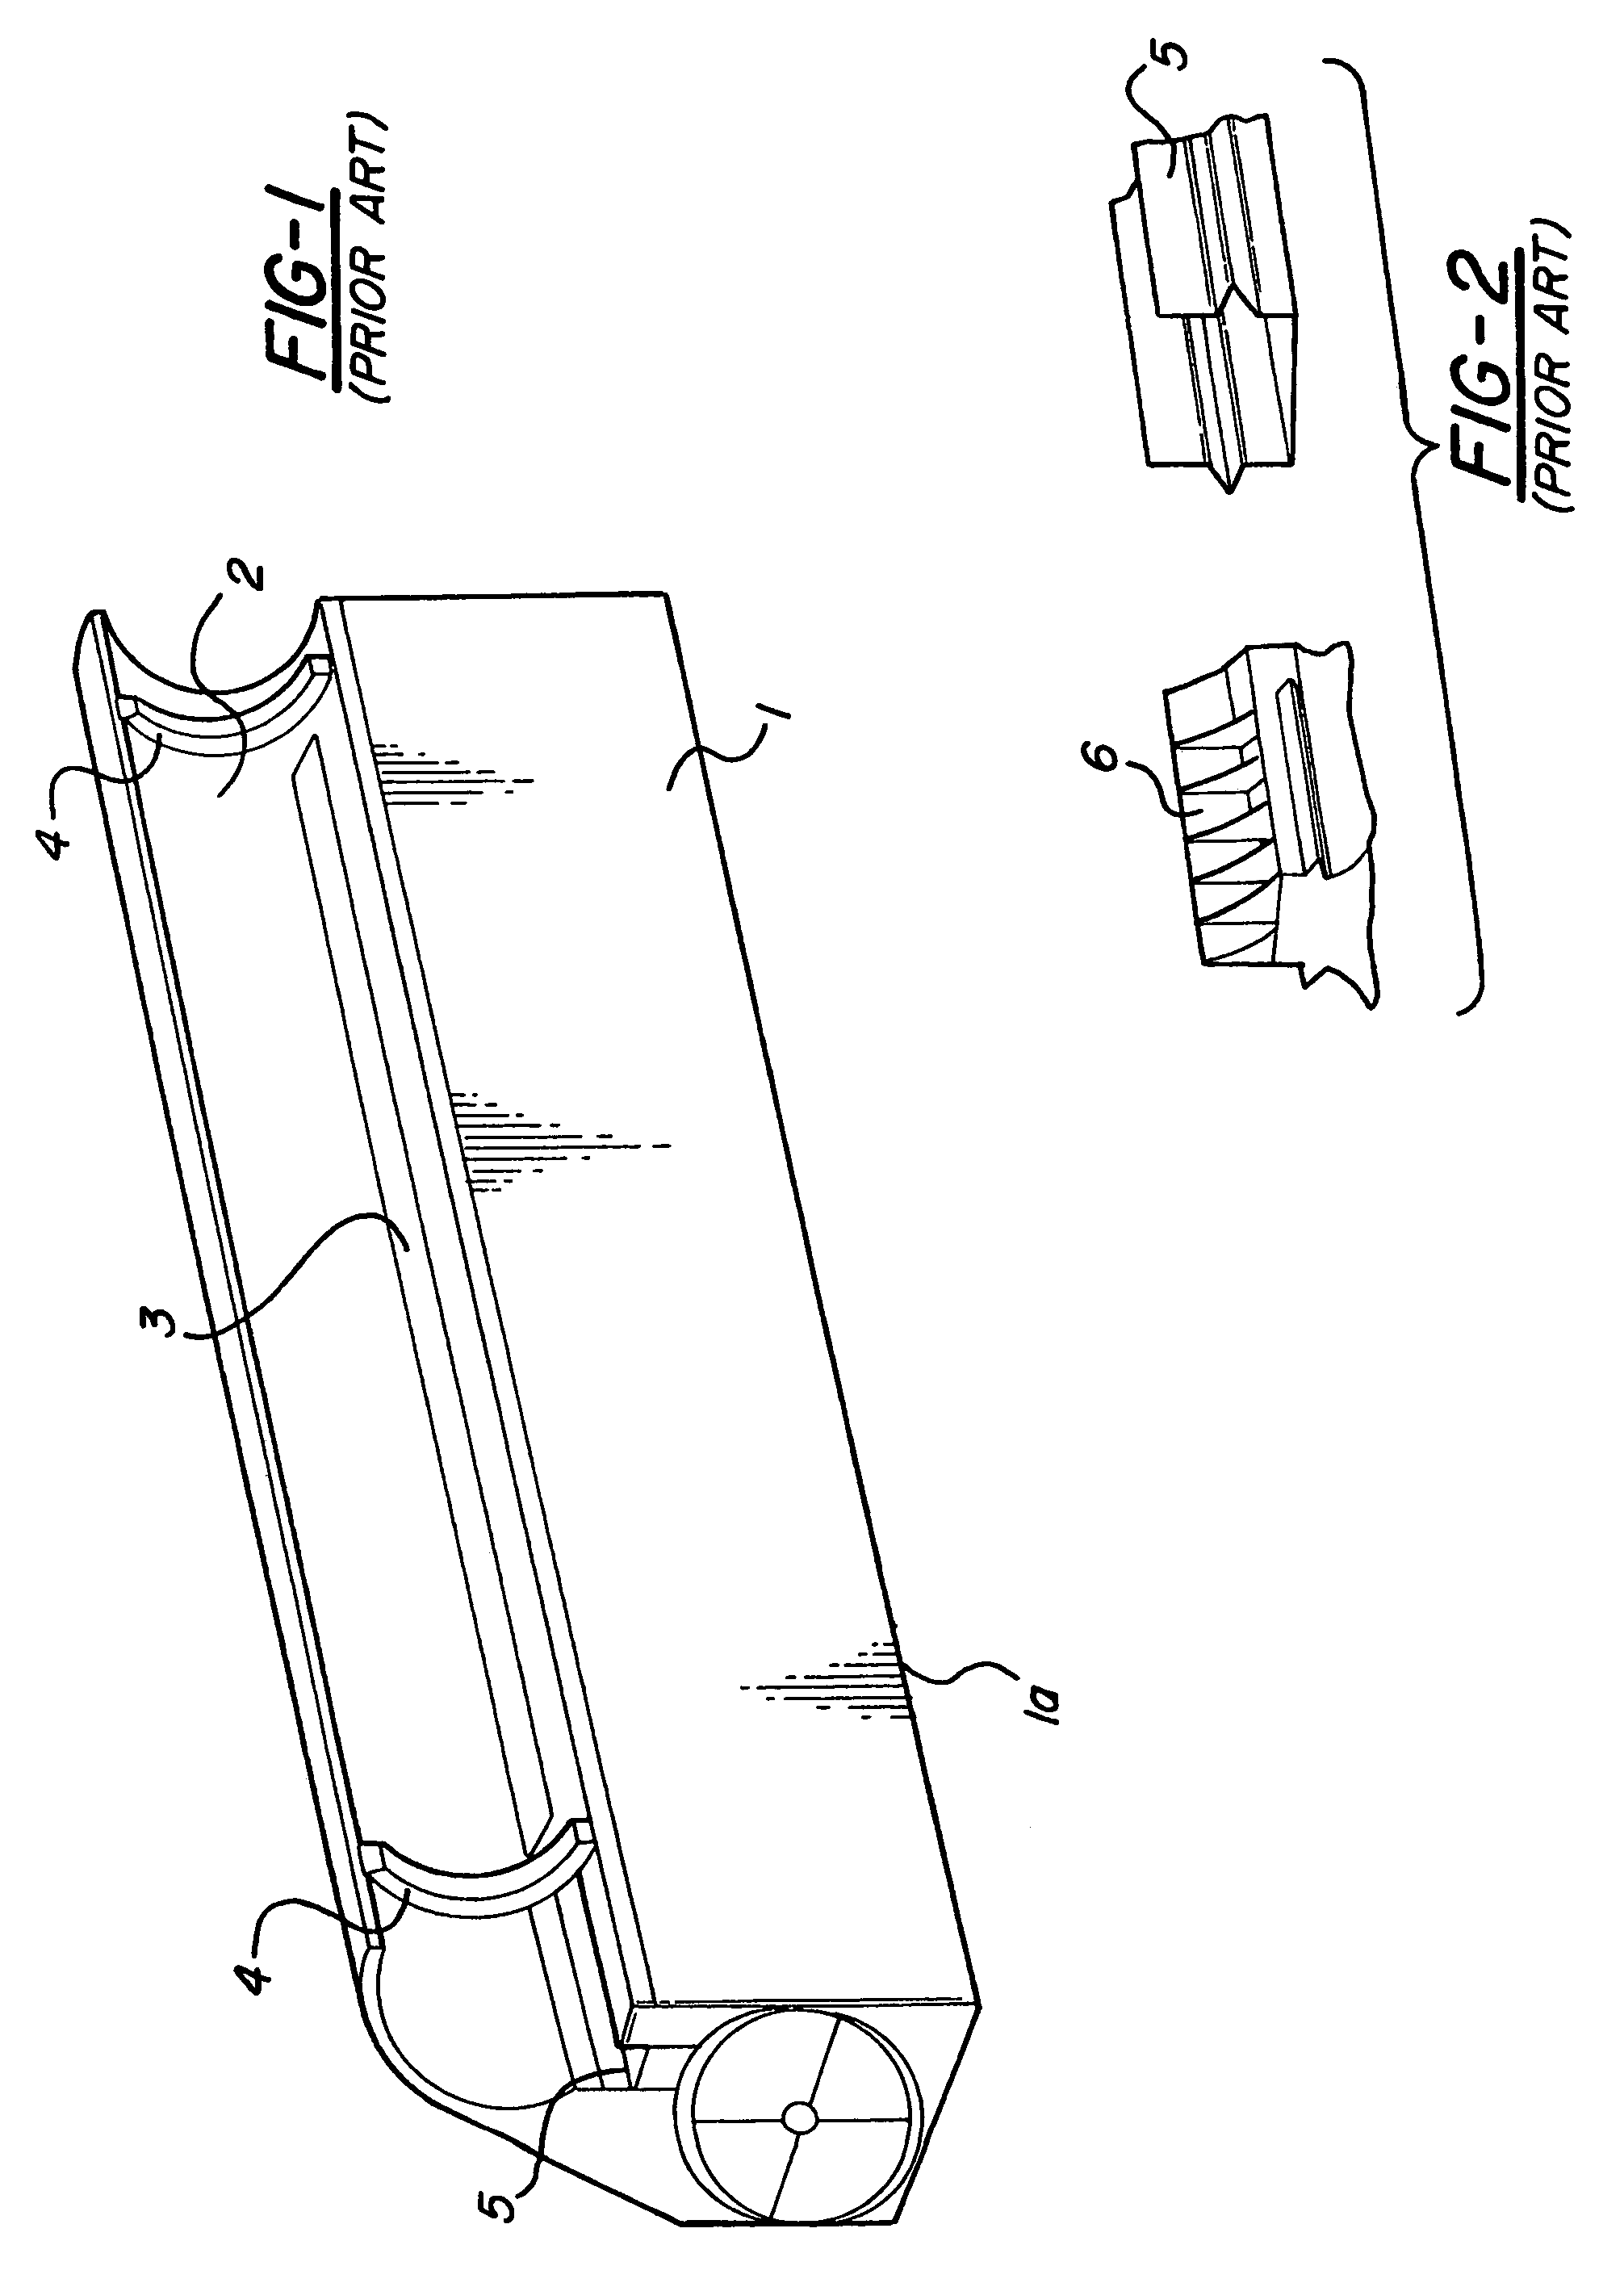 Tear-strip seal and tear-seal assembly using a pre-cut tear initialization and a toner hopper, toner cartridge and image forming apparatus using same and method of manufacturing same seal, toner hopper and toner cartridge assembly